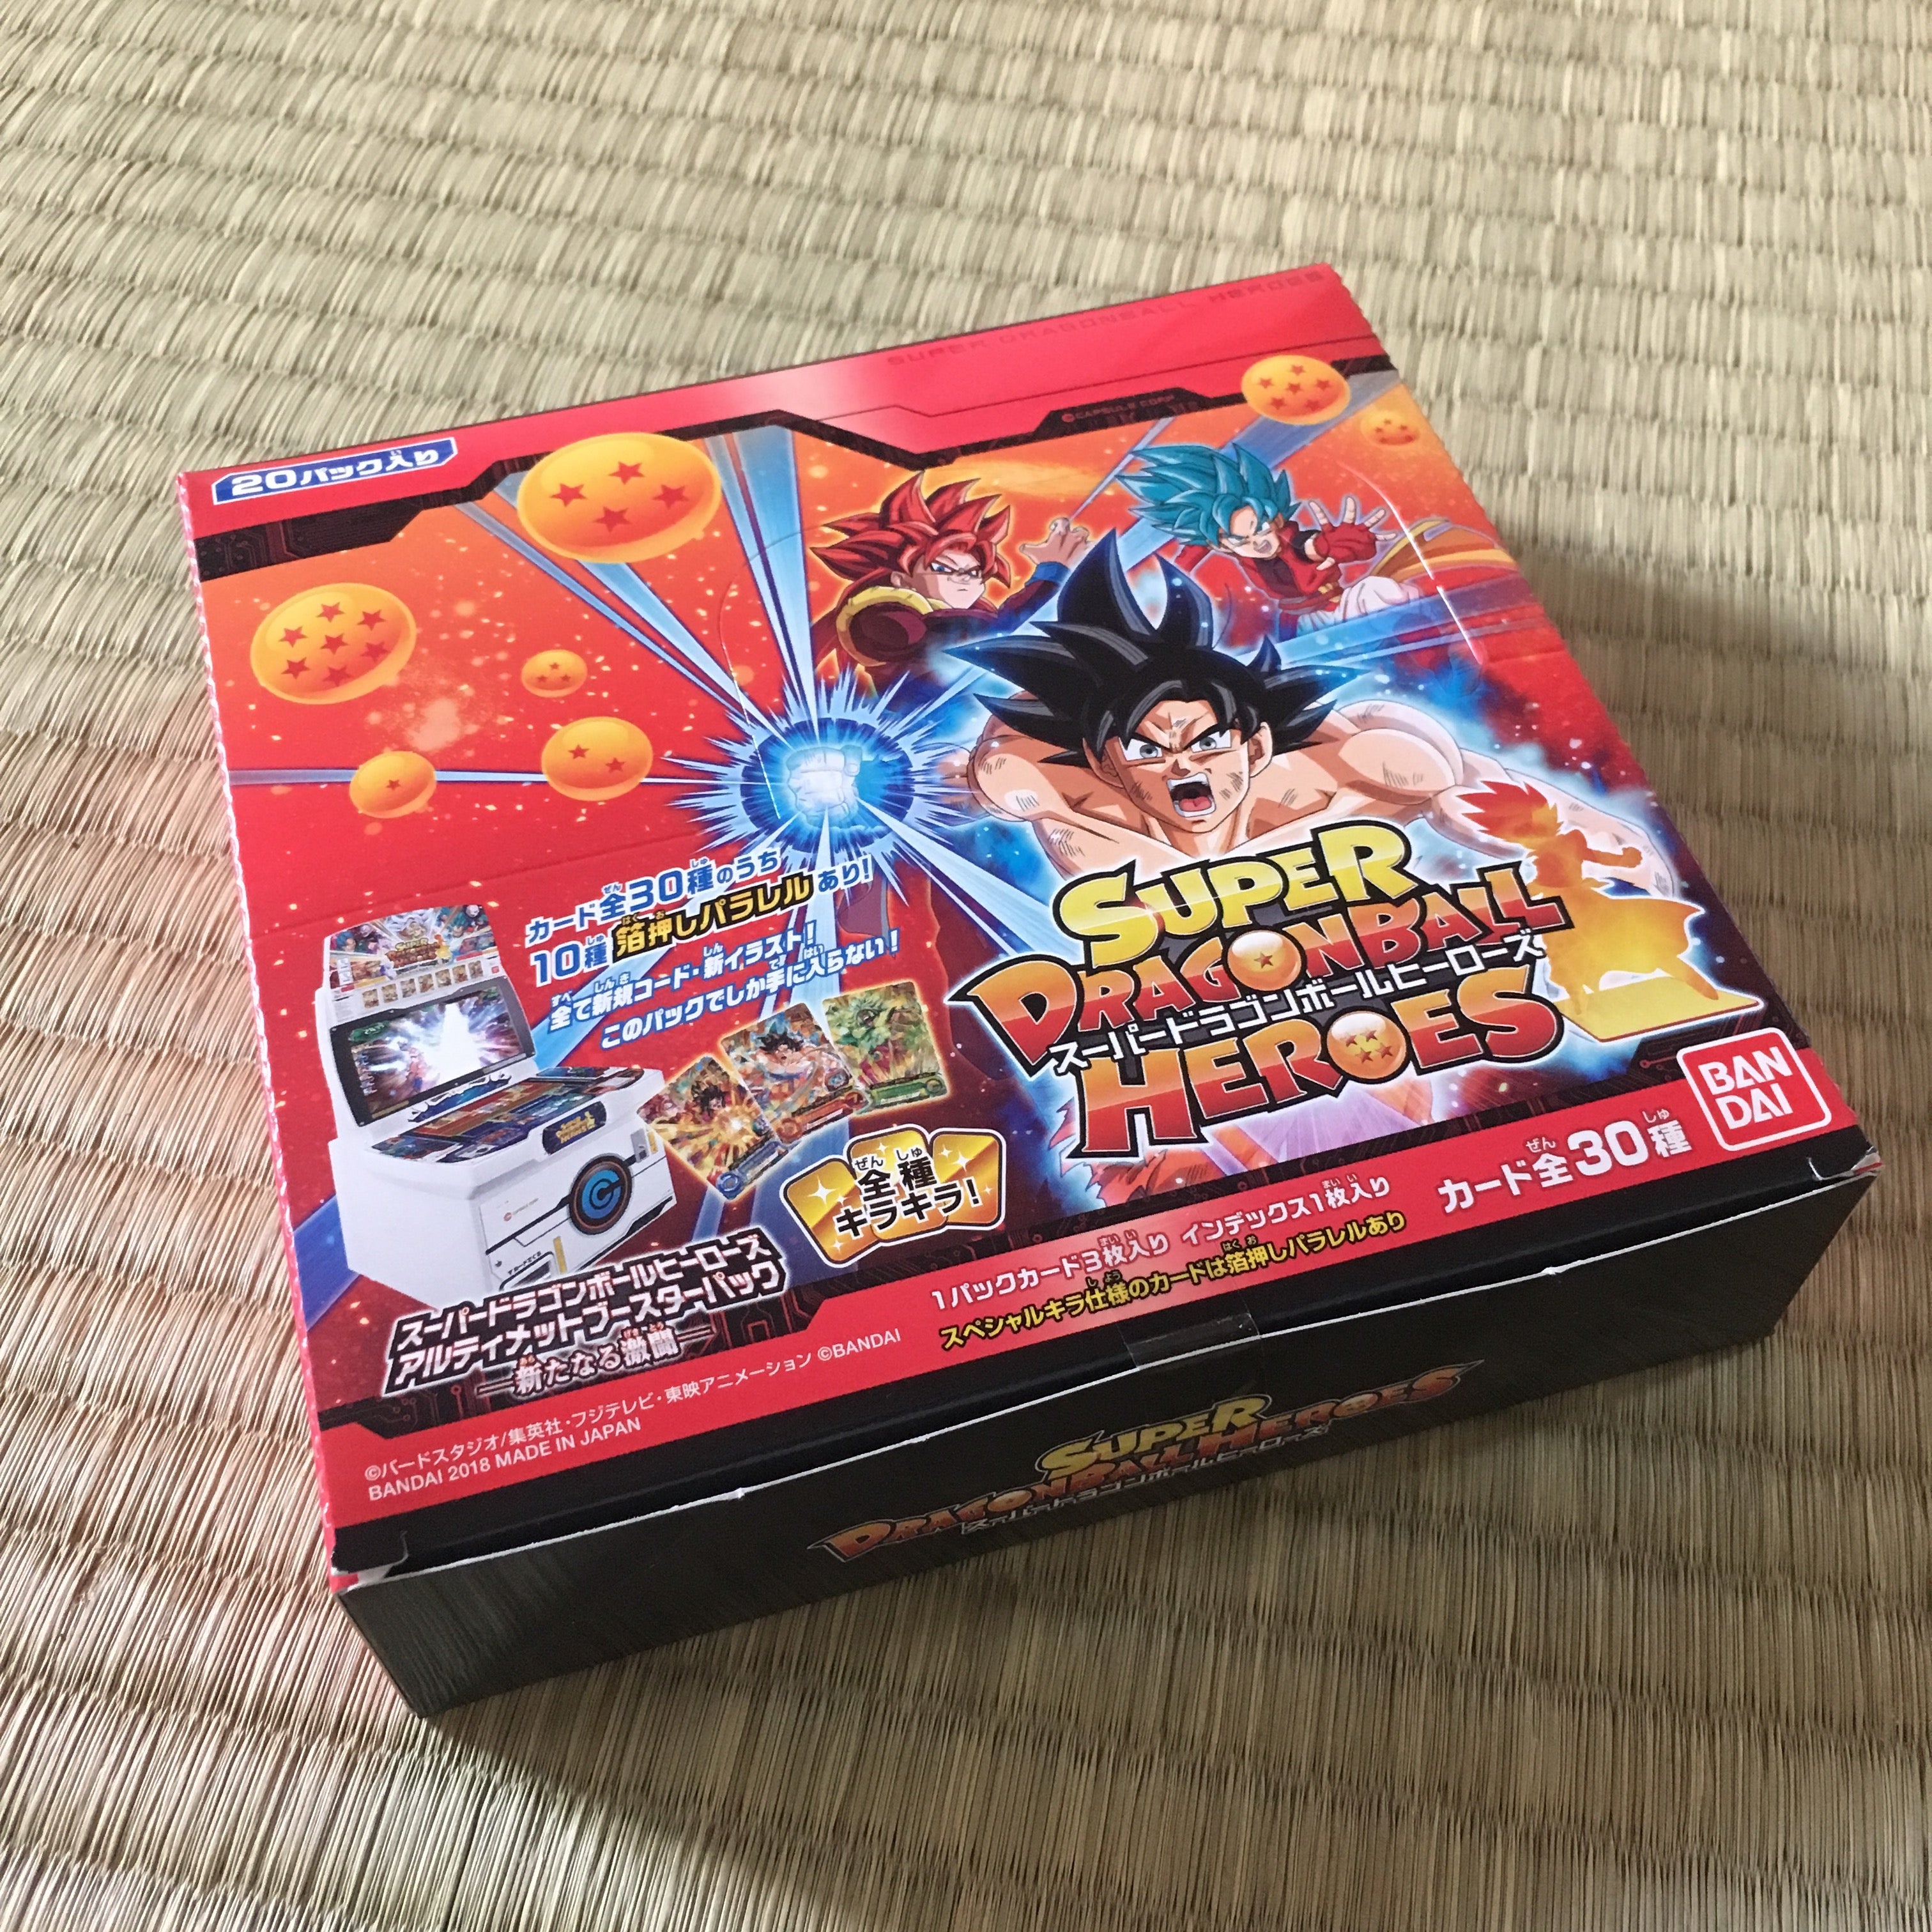 SUPER DRAGON BALL HEROES ULTIMATE BOOSTER PACK PUMS3 pieno